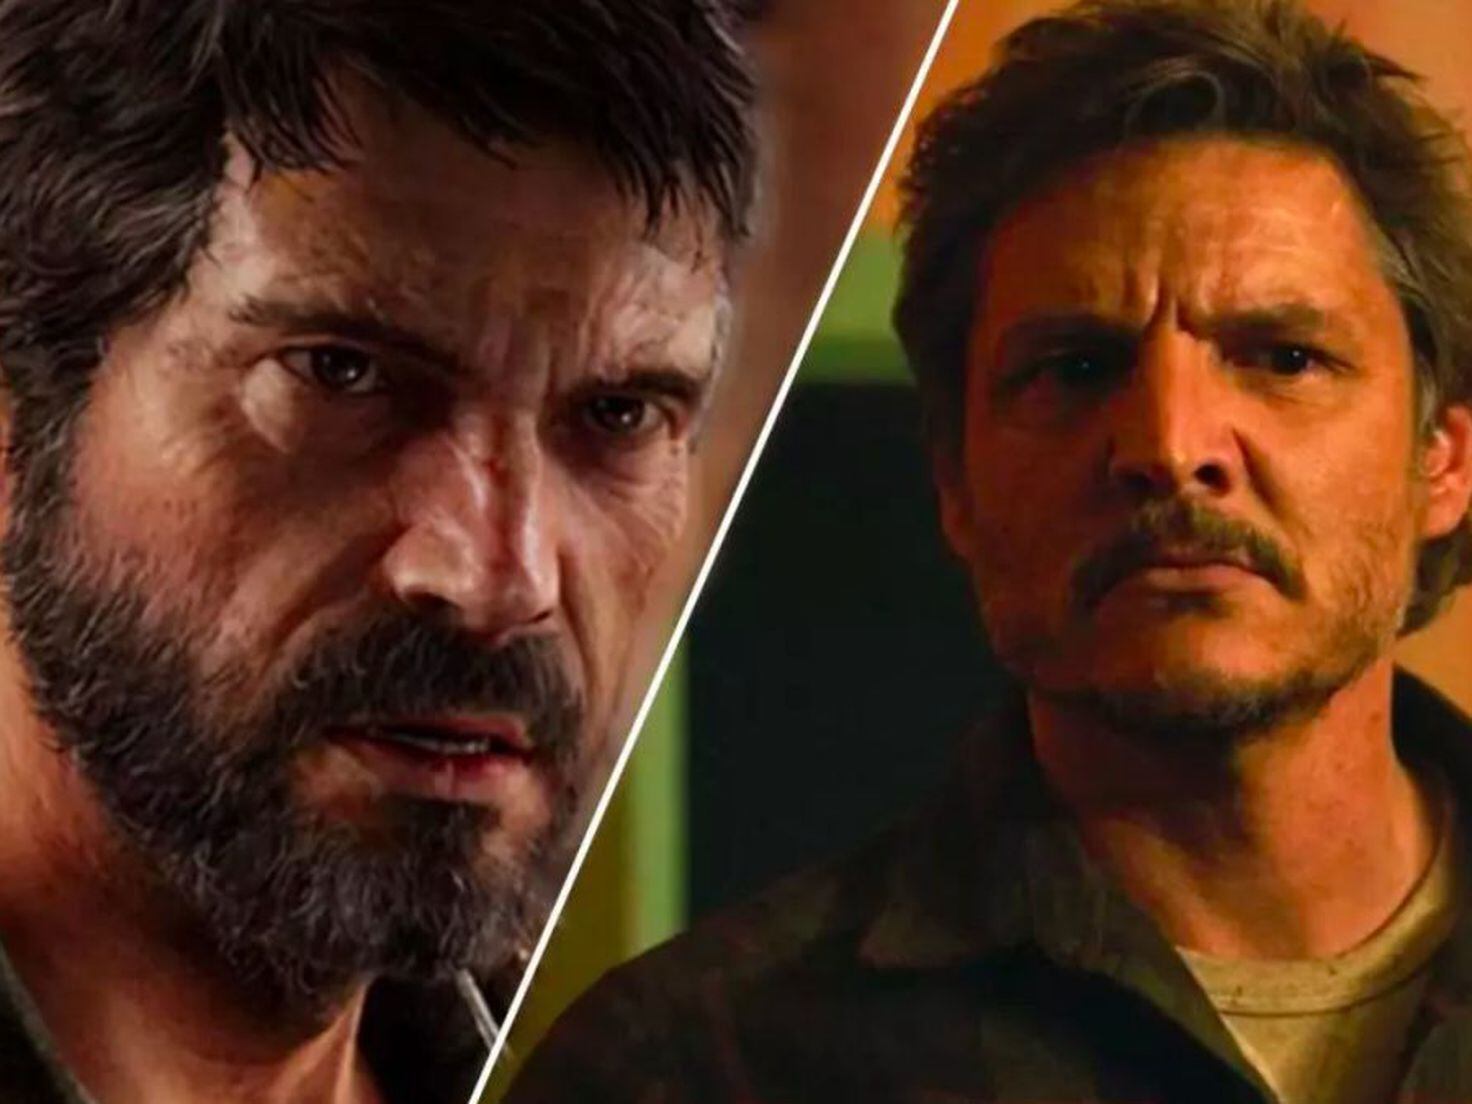 The Last Of Us TV Show And Video Game Differences